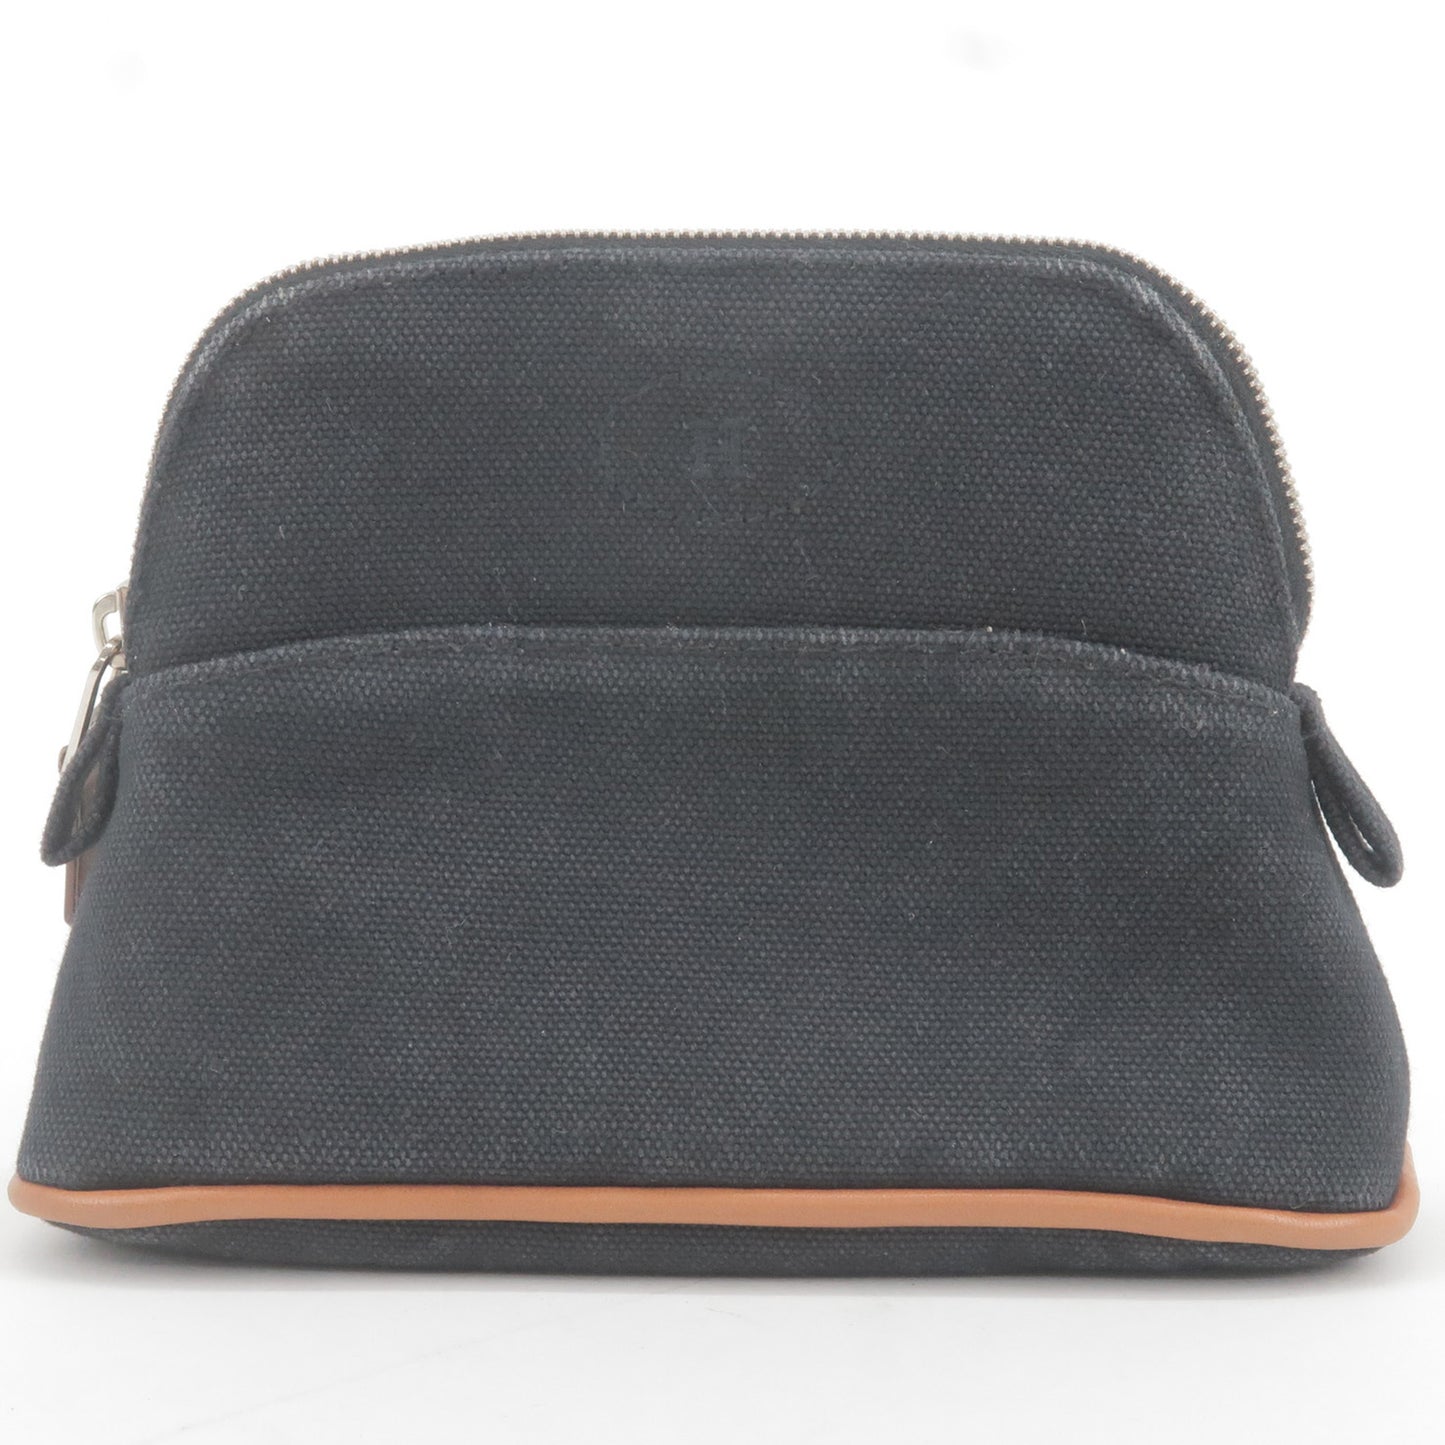 HERMES Bolide Pouch Canvas Leather Mini Cosmetics Bag Black